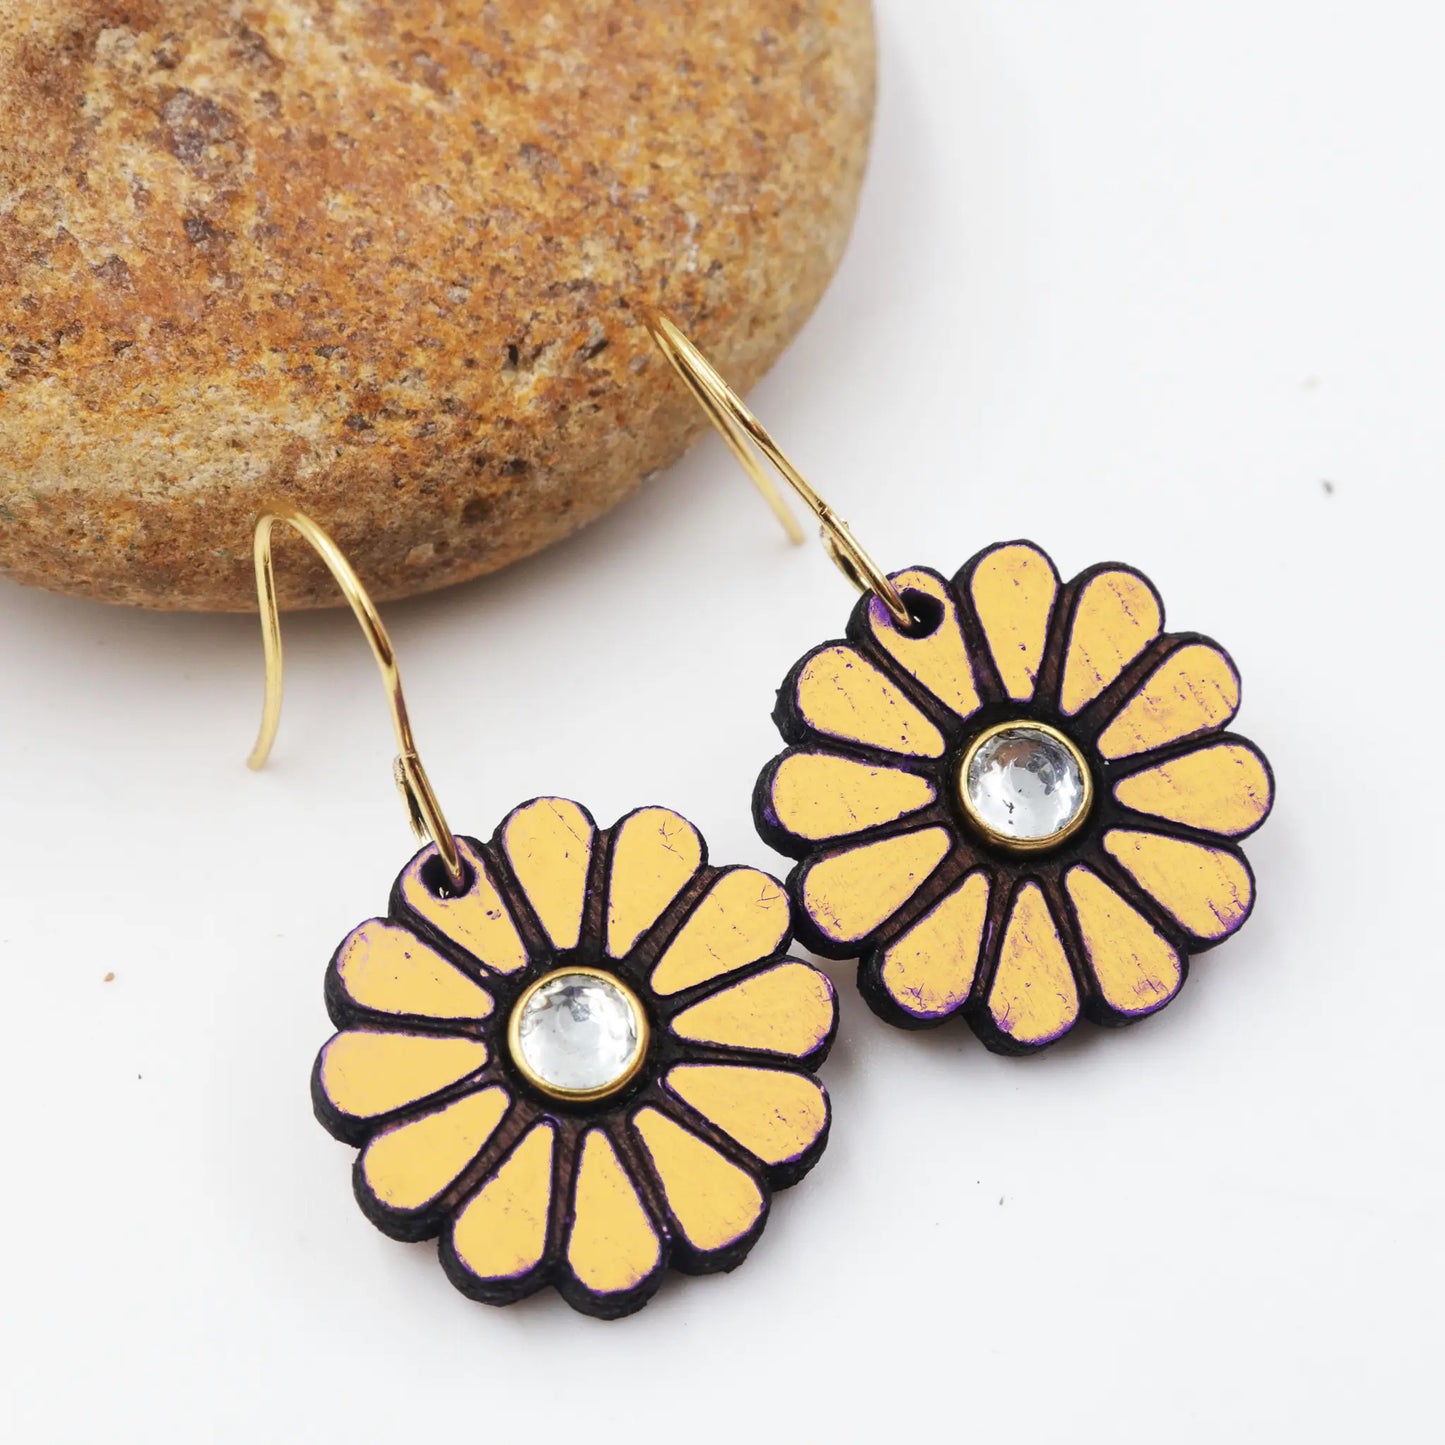 Wooden earrings | floral design embellished with kundan stones | hand-painted wooden light weight earrings